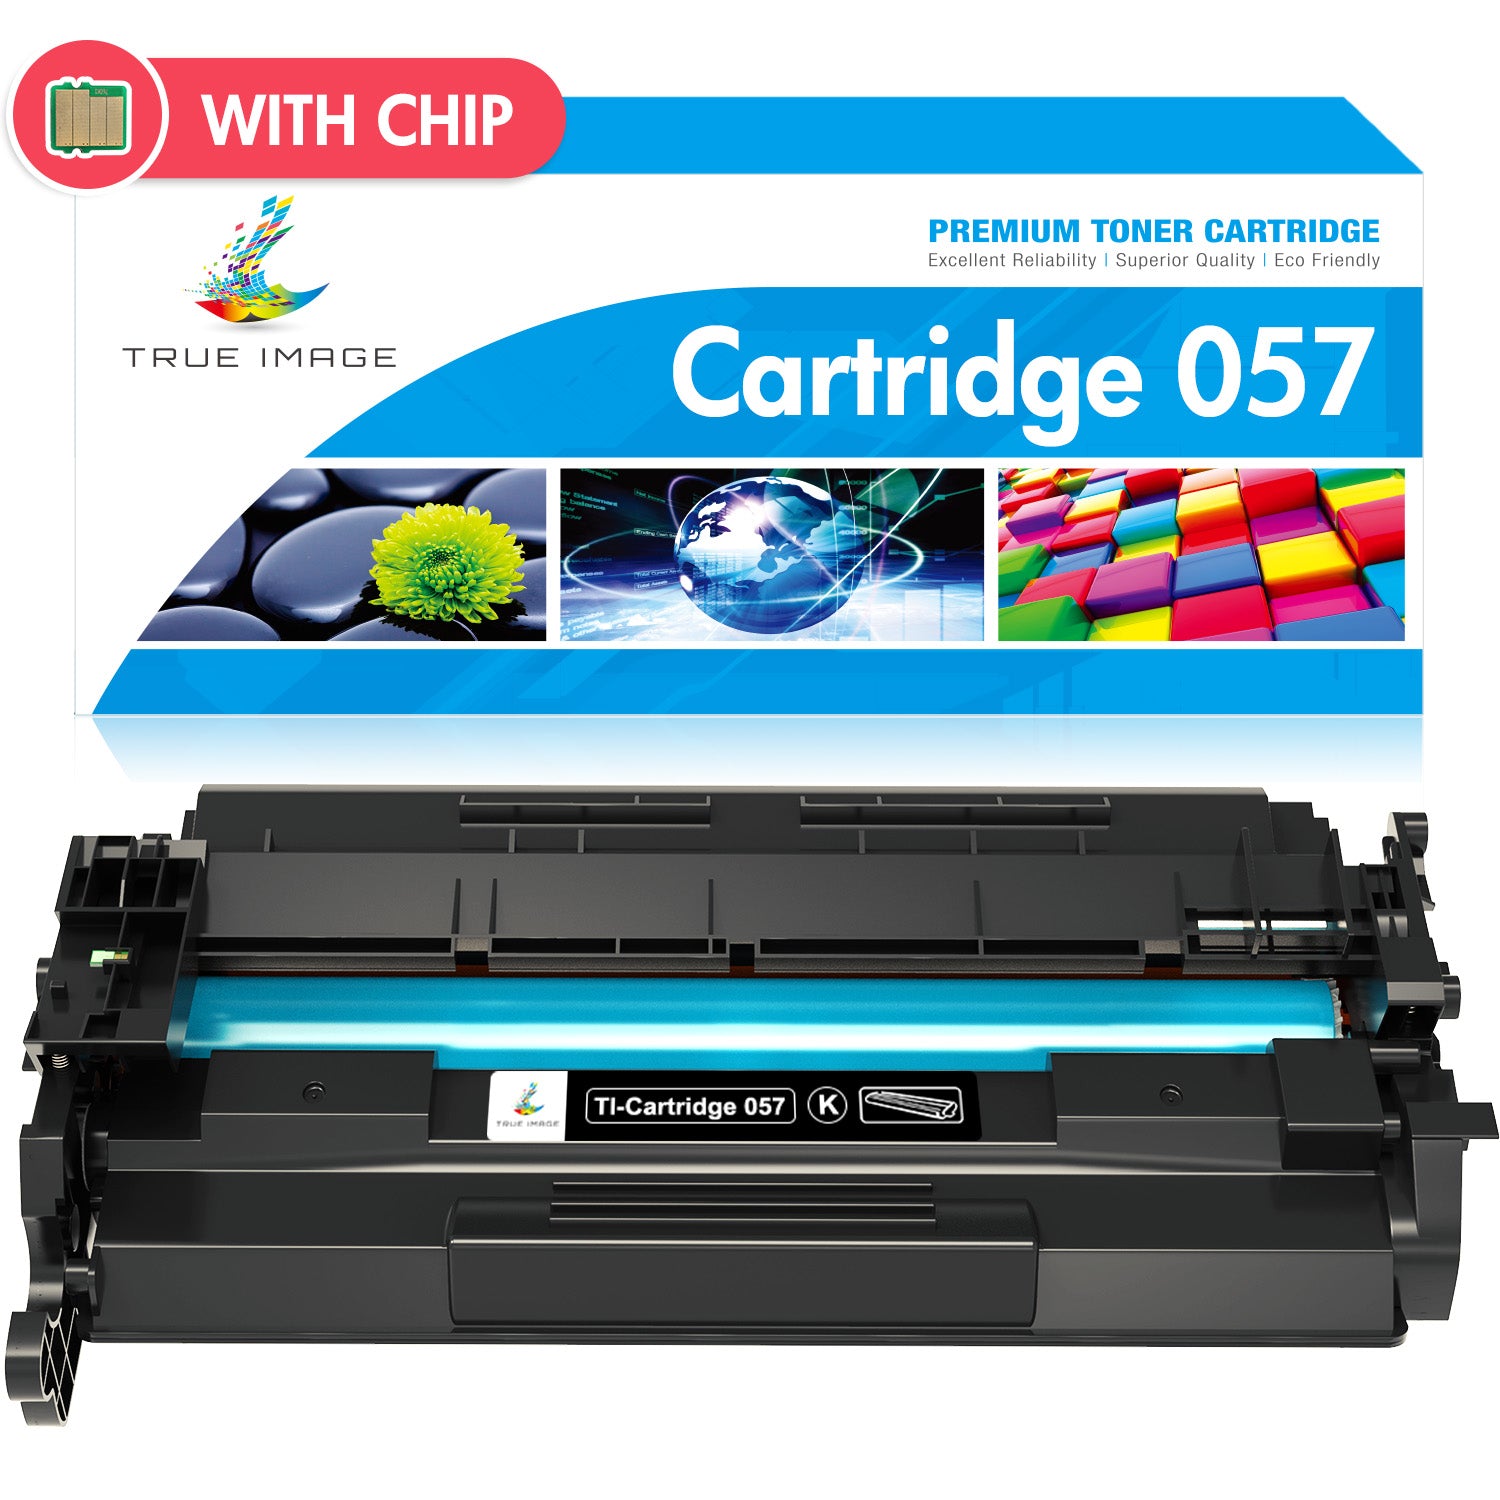 Canon Toner Cartridge With Chip, Can